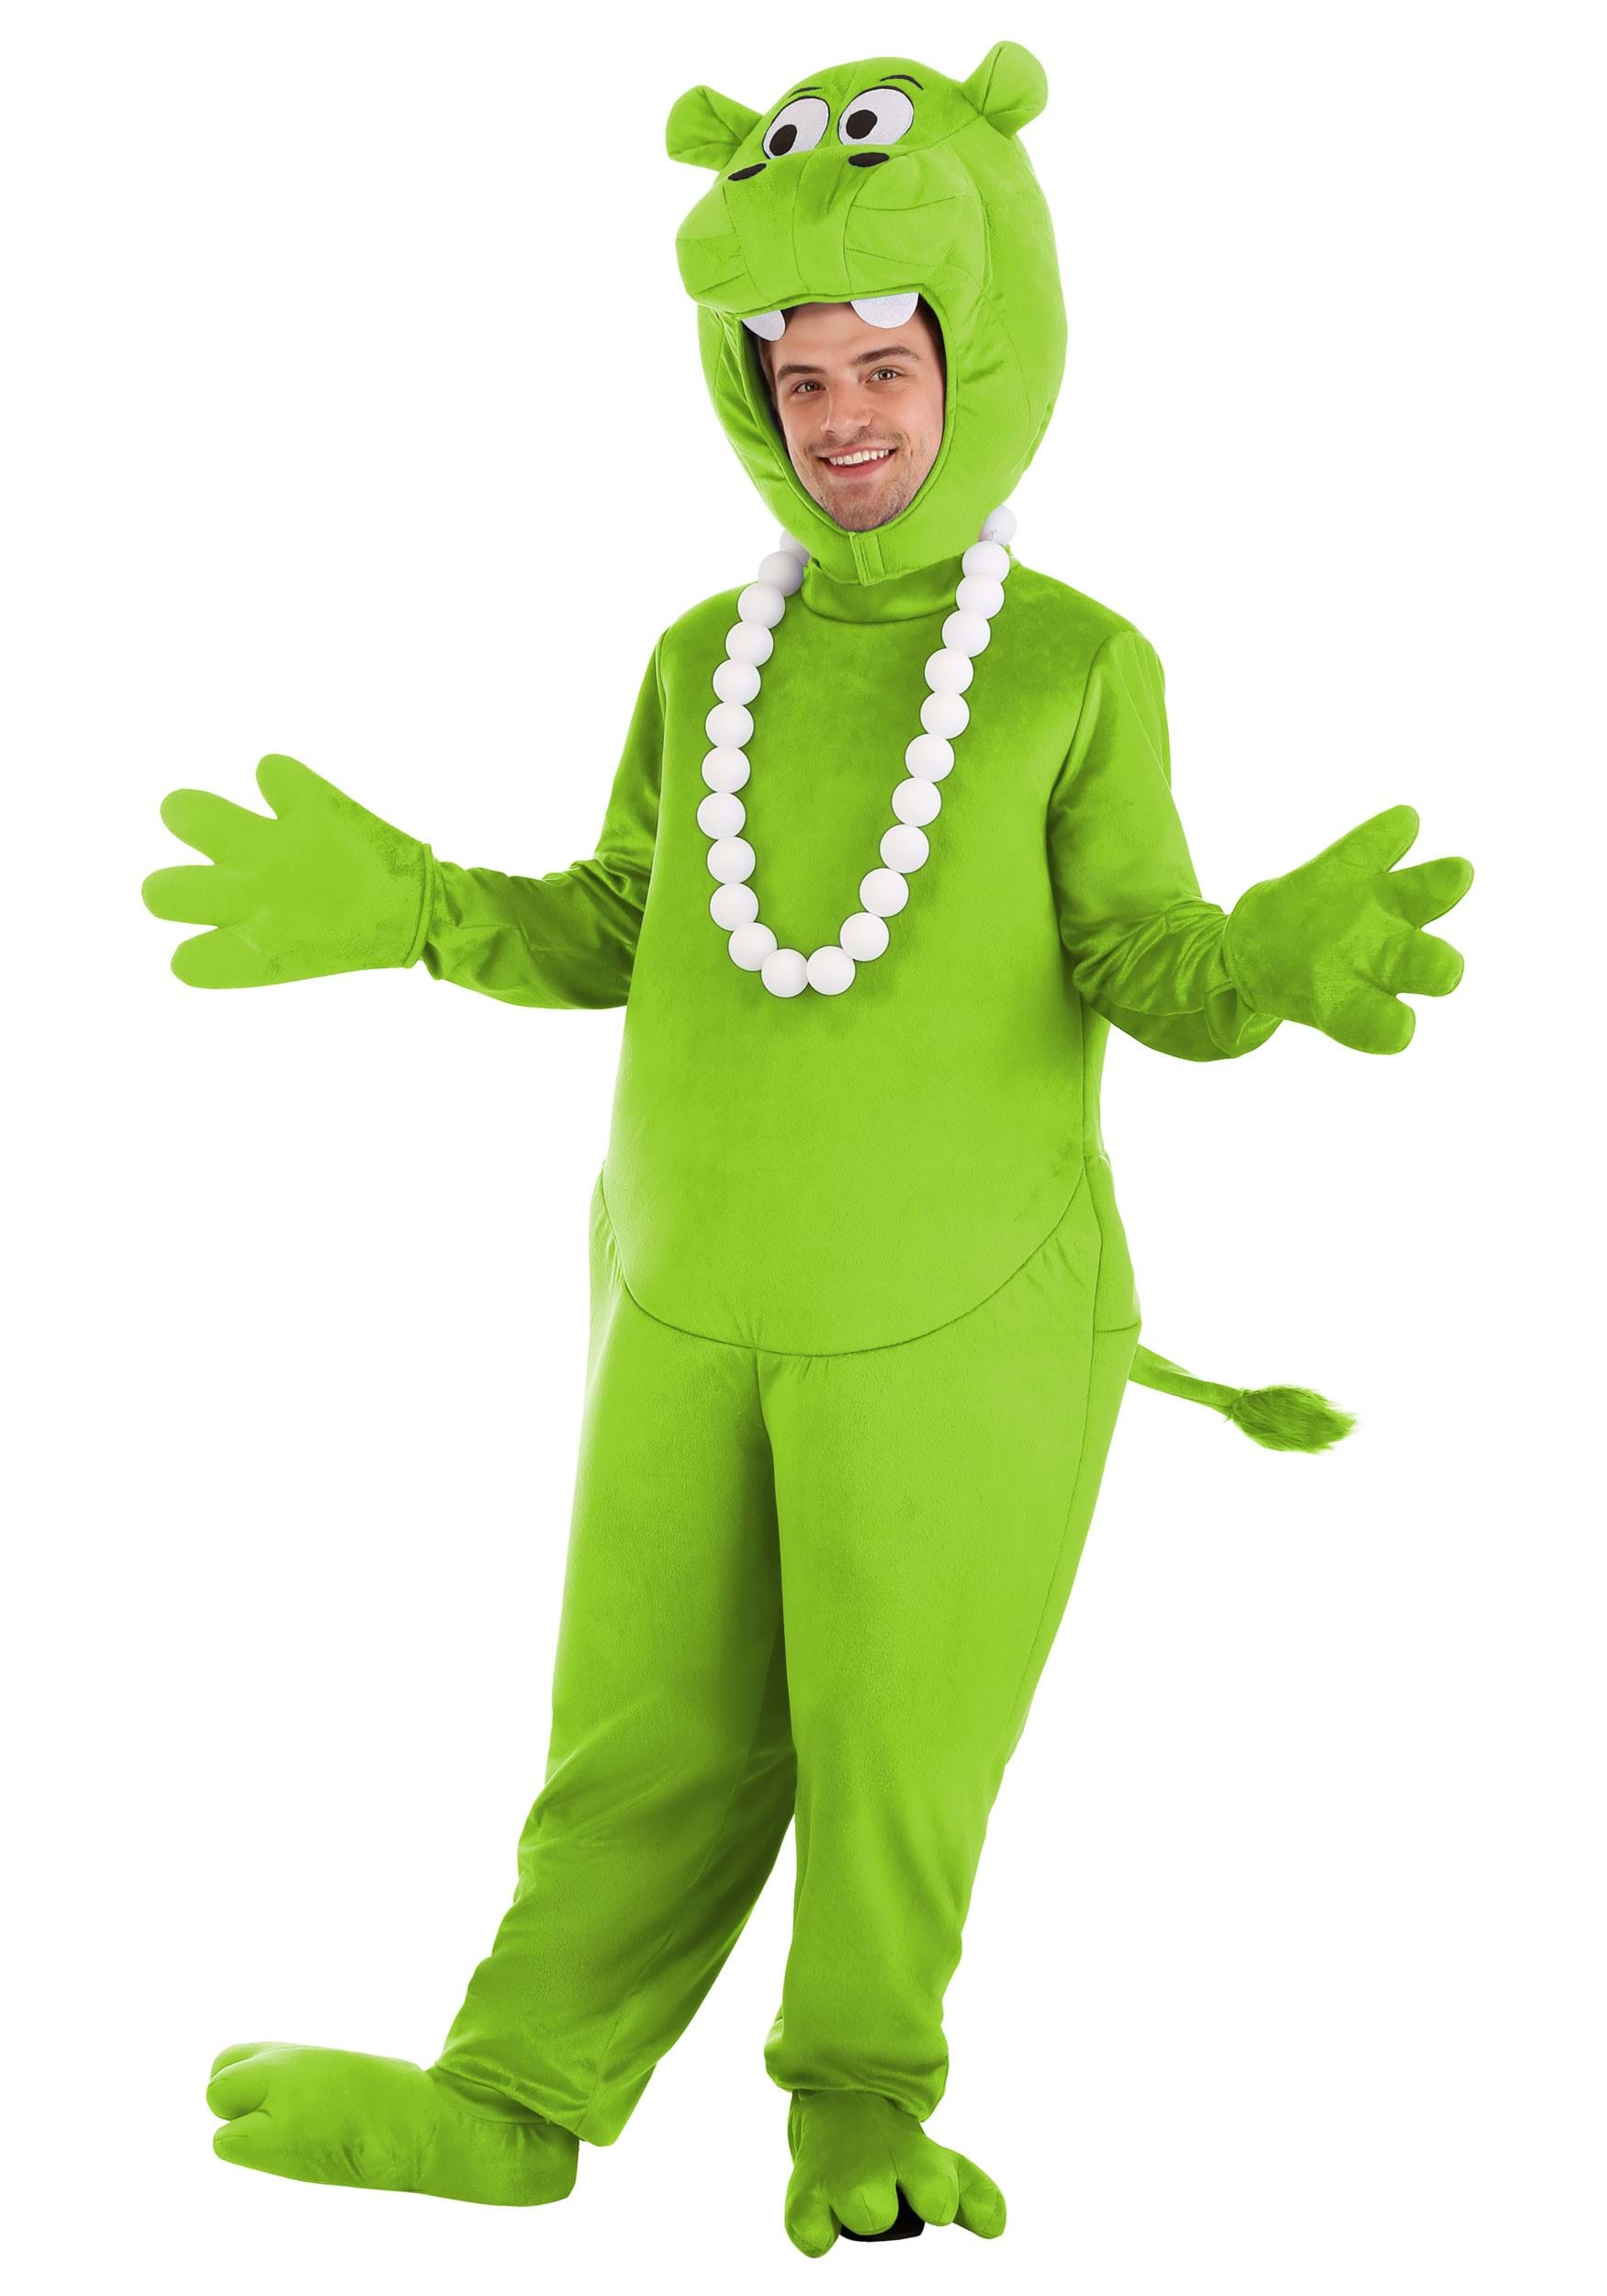 Photos - Fancy Dress Hasbro Green Adult Hungry Hungry Hippos Costume Green FUN1696AD 